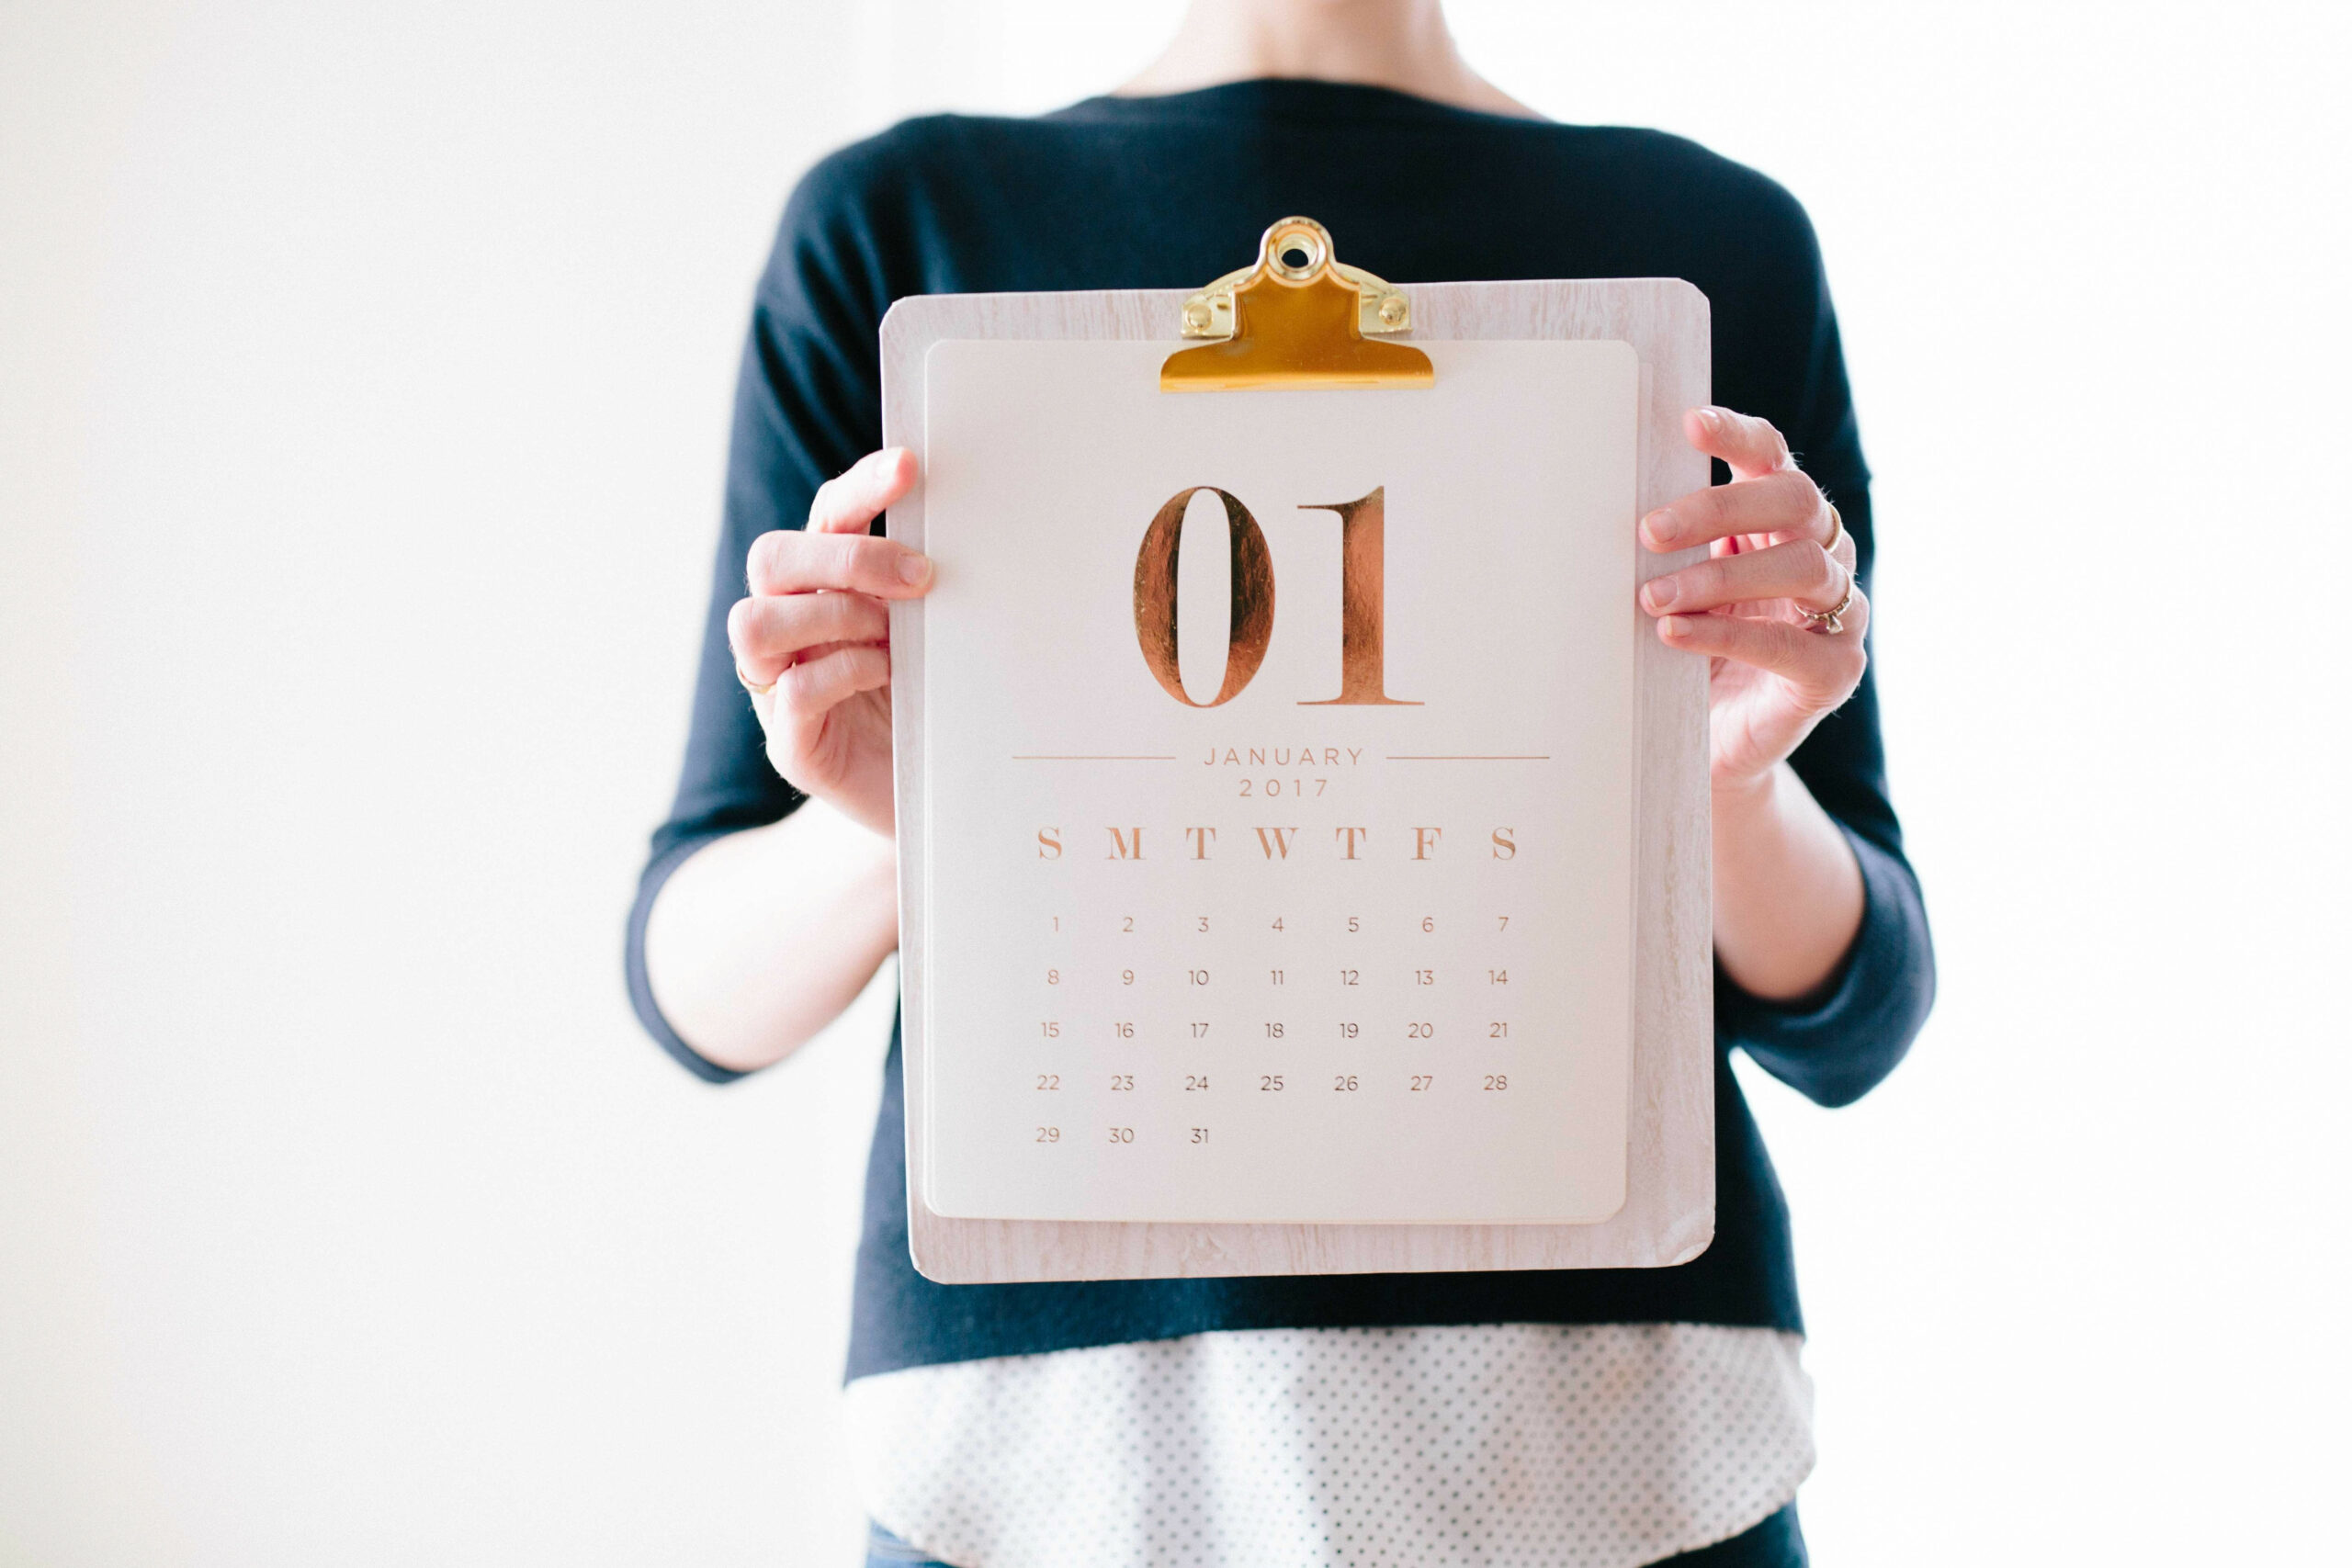 Calendar days or working days: know the difference and make that